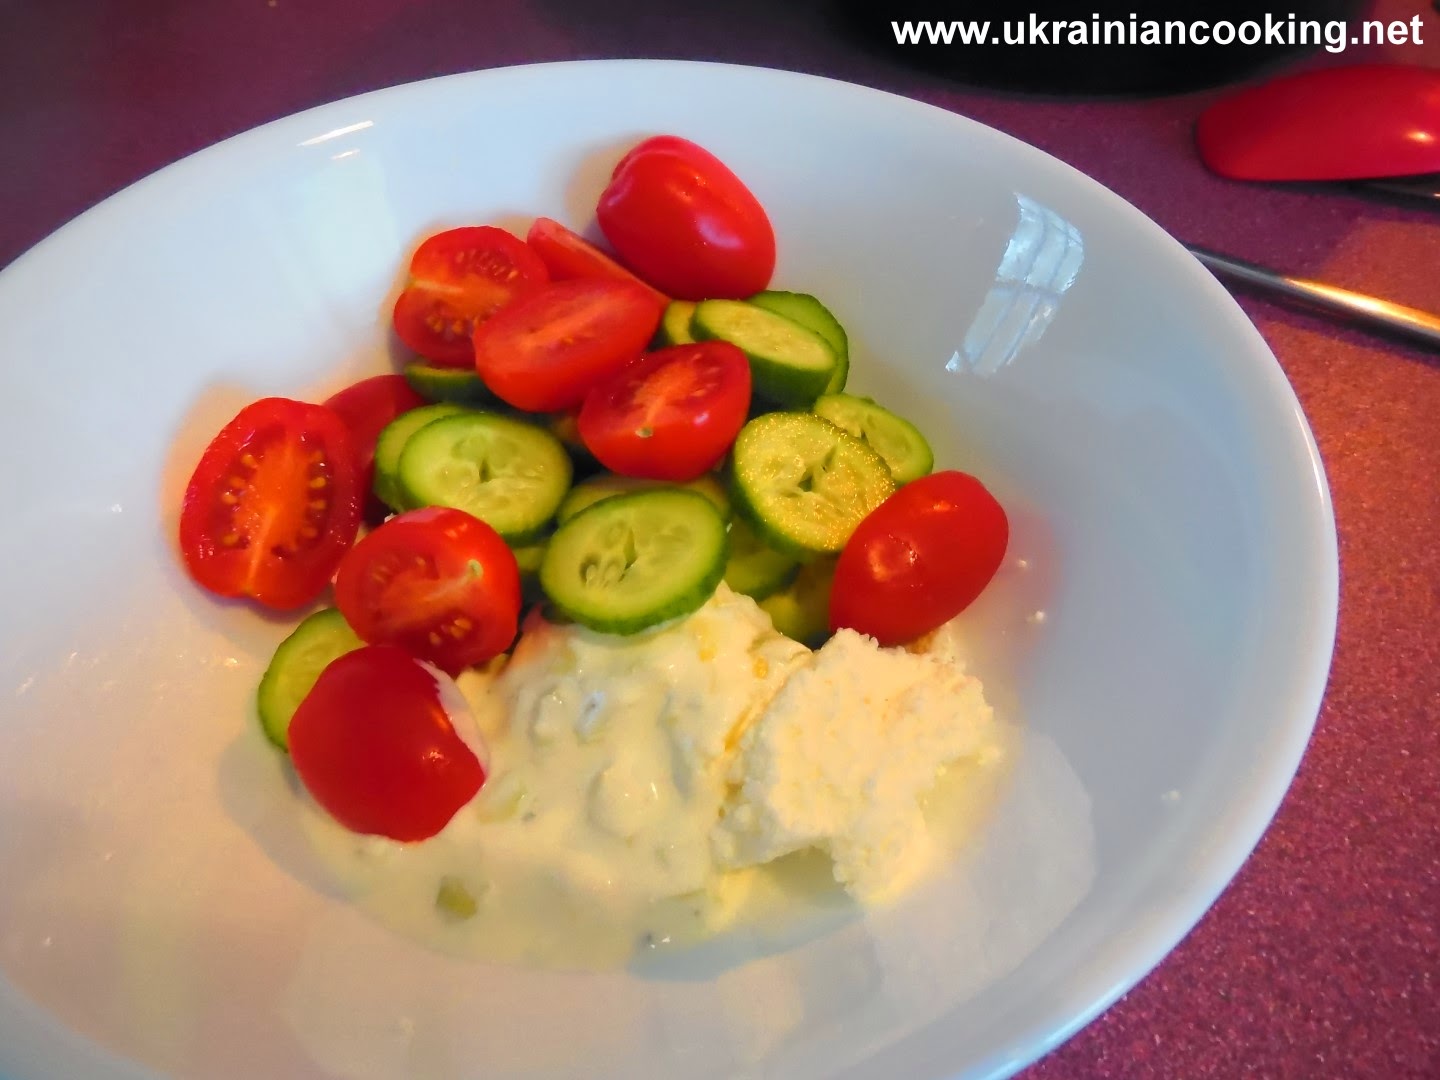 Very common Ukrainian salad is cottage cheese, sour creme and cucumbers